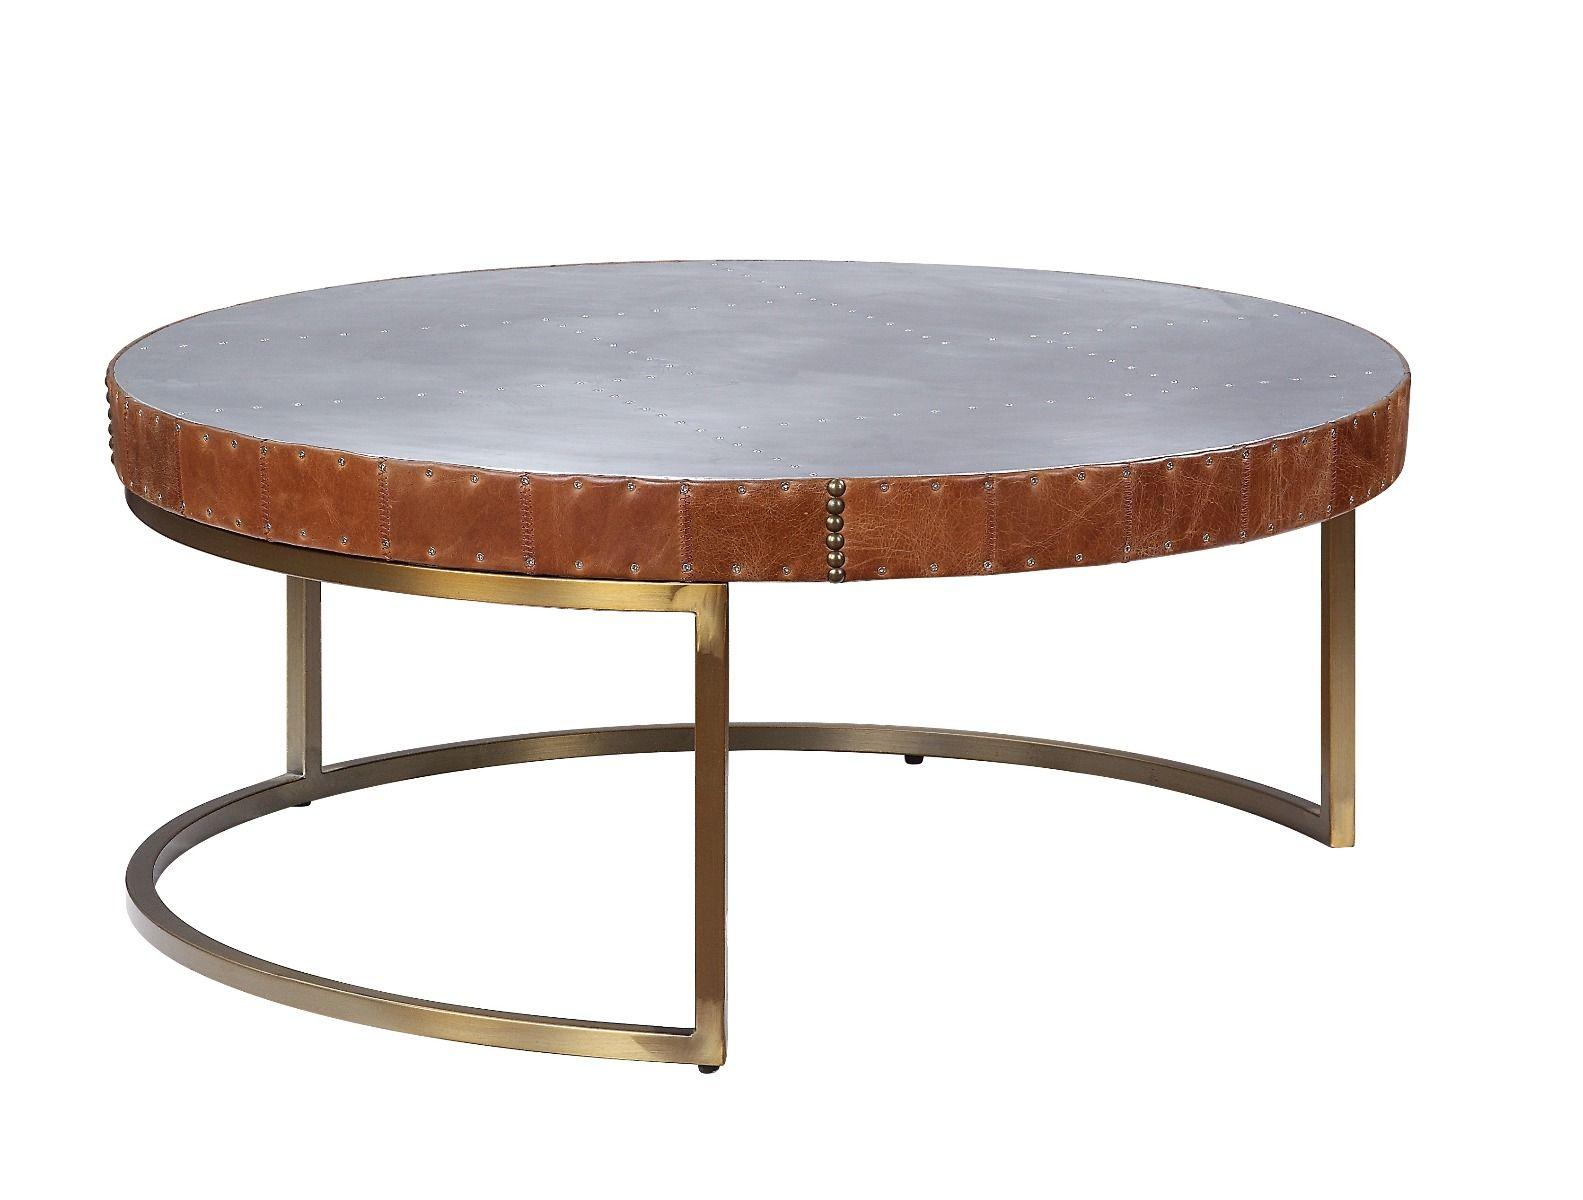 Contemporary Nesting Tables Tamas 84885 in Cocoa Top grain leather